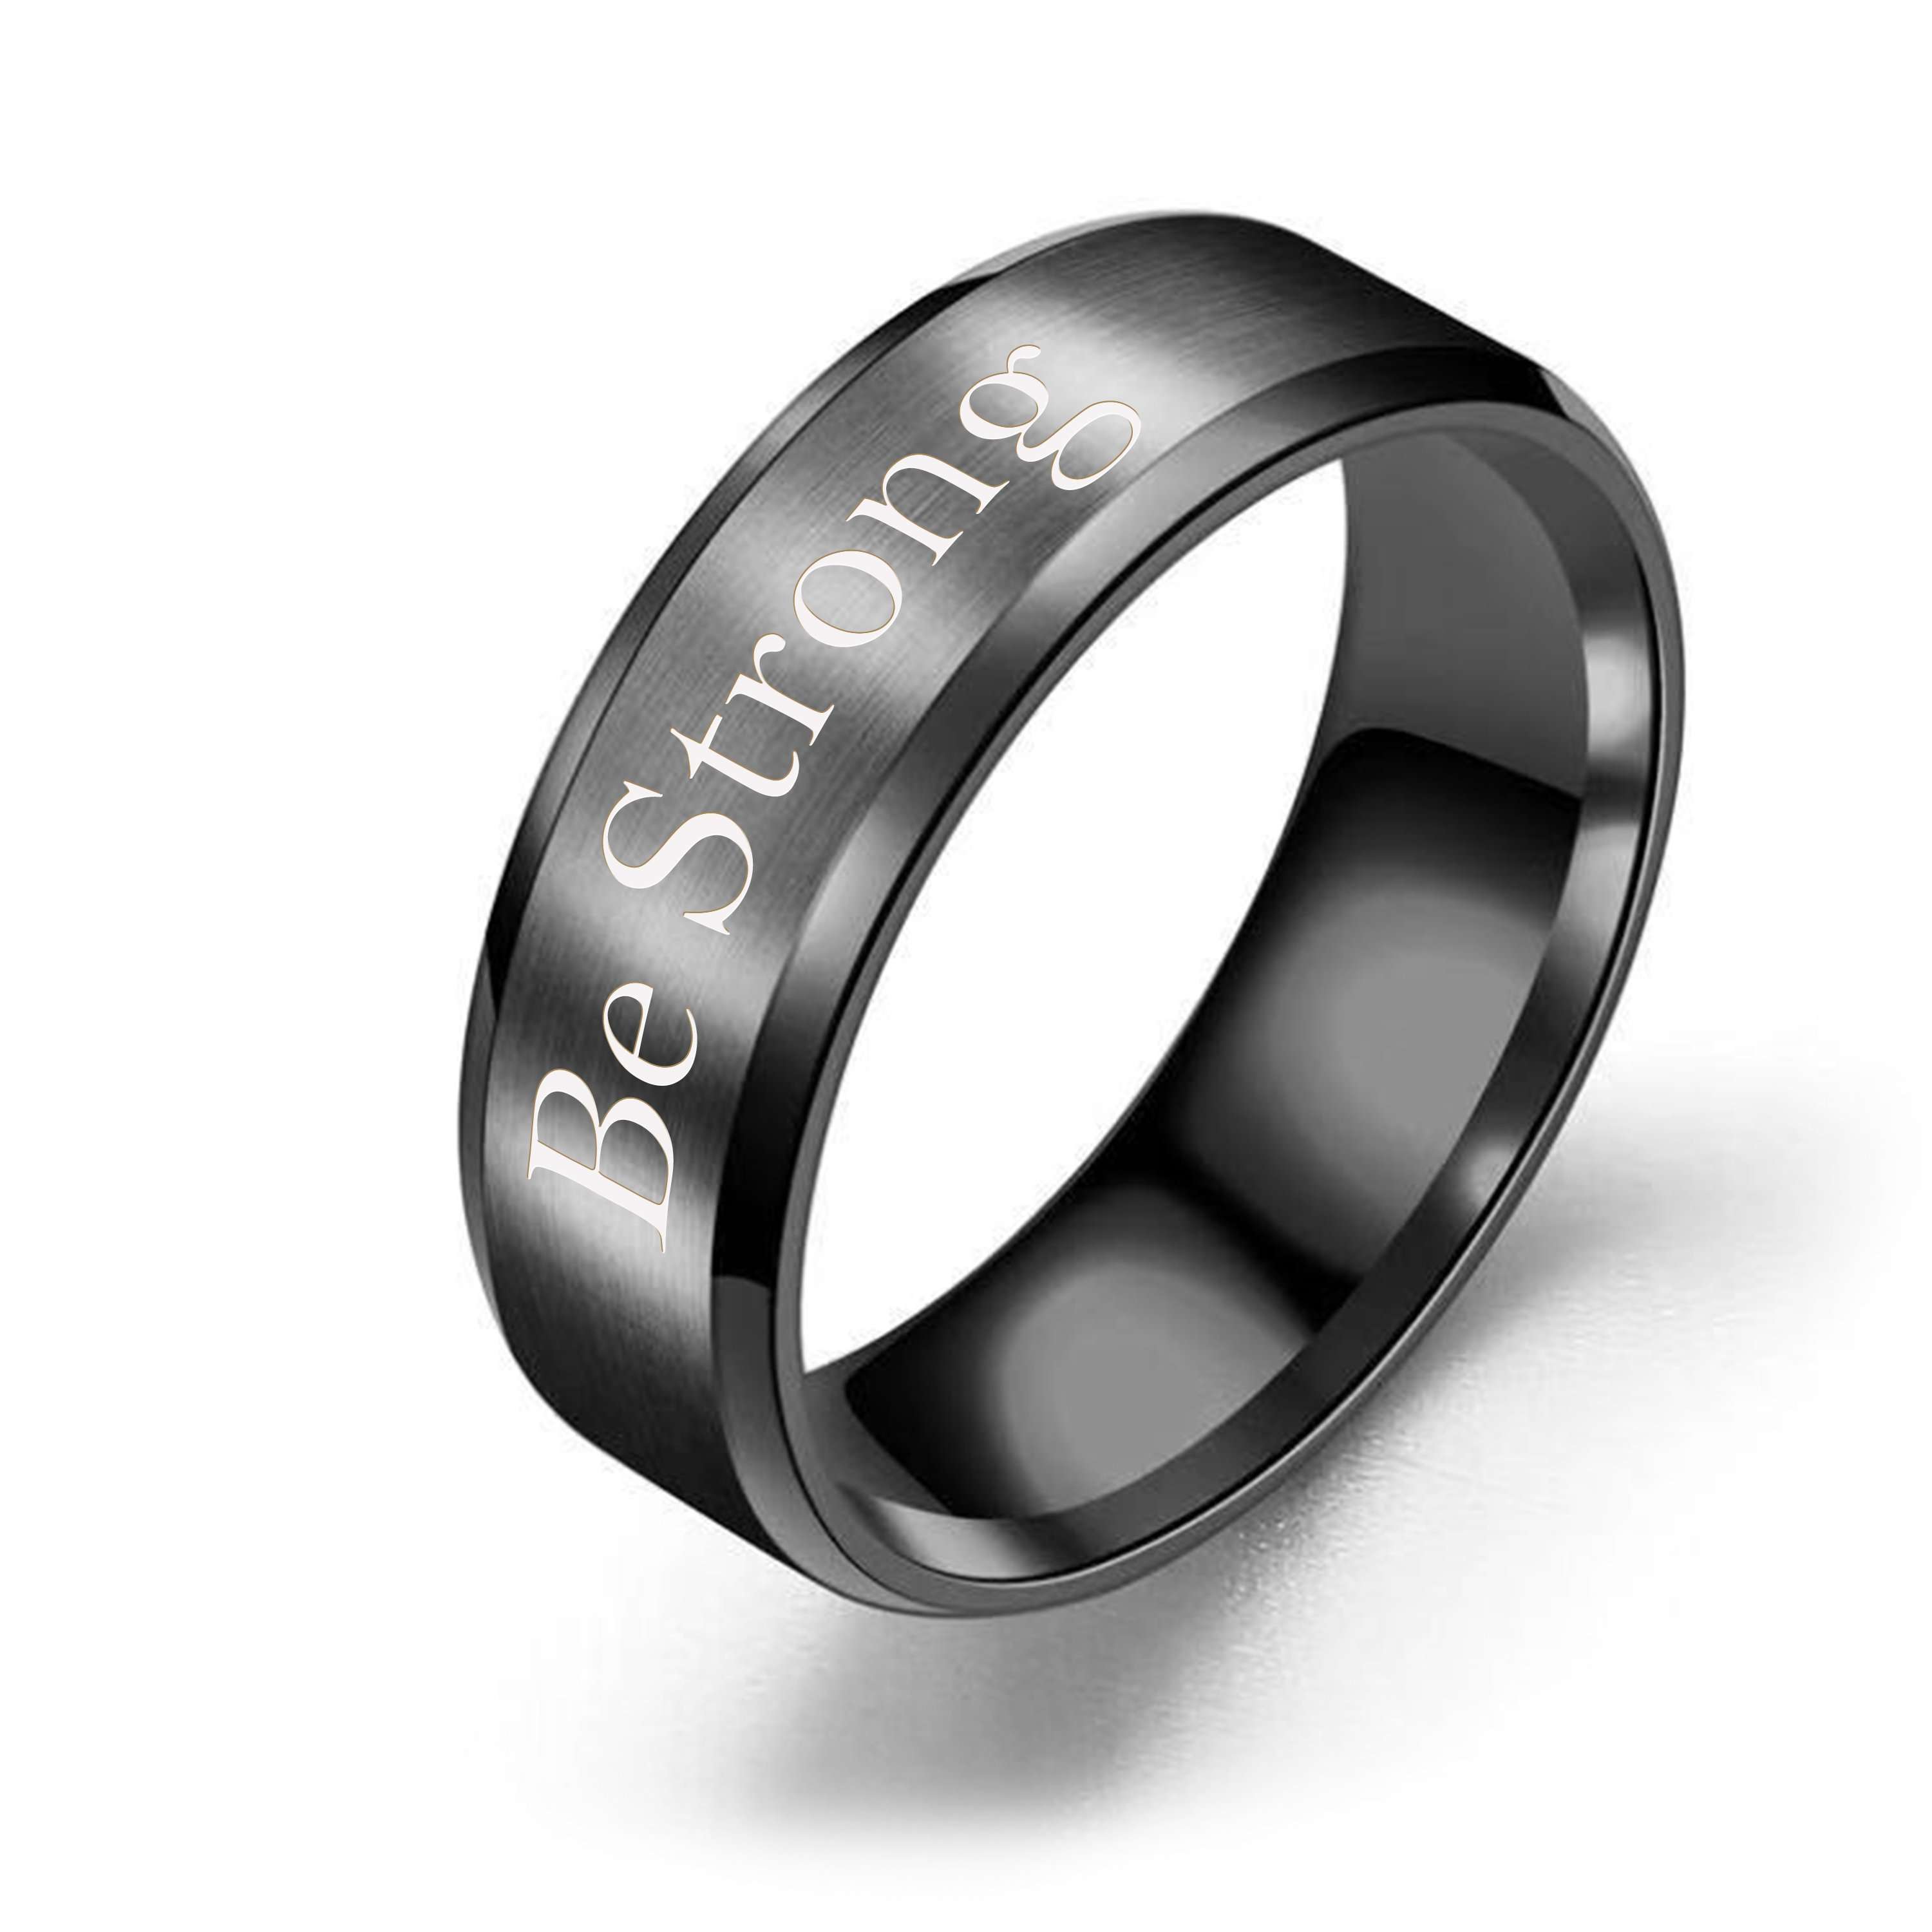 8mm Solid Stainless Steel Comfort Fit Ring in Black - Be Strong